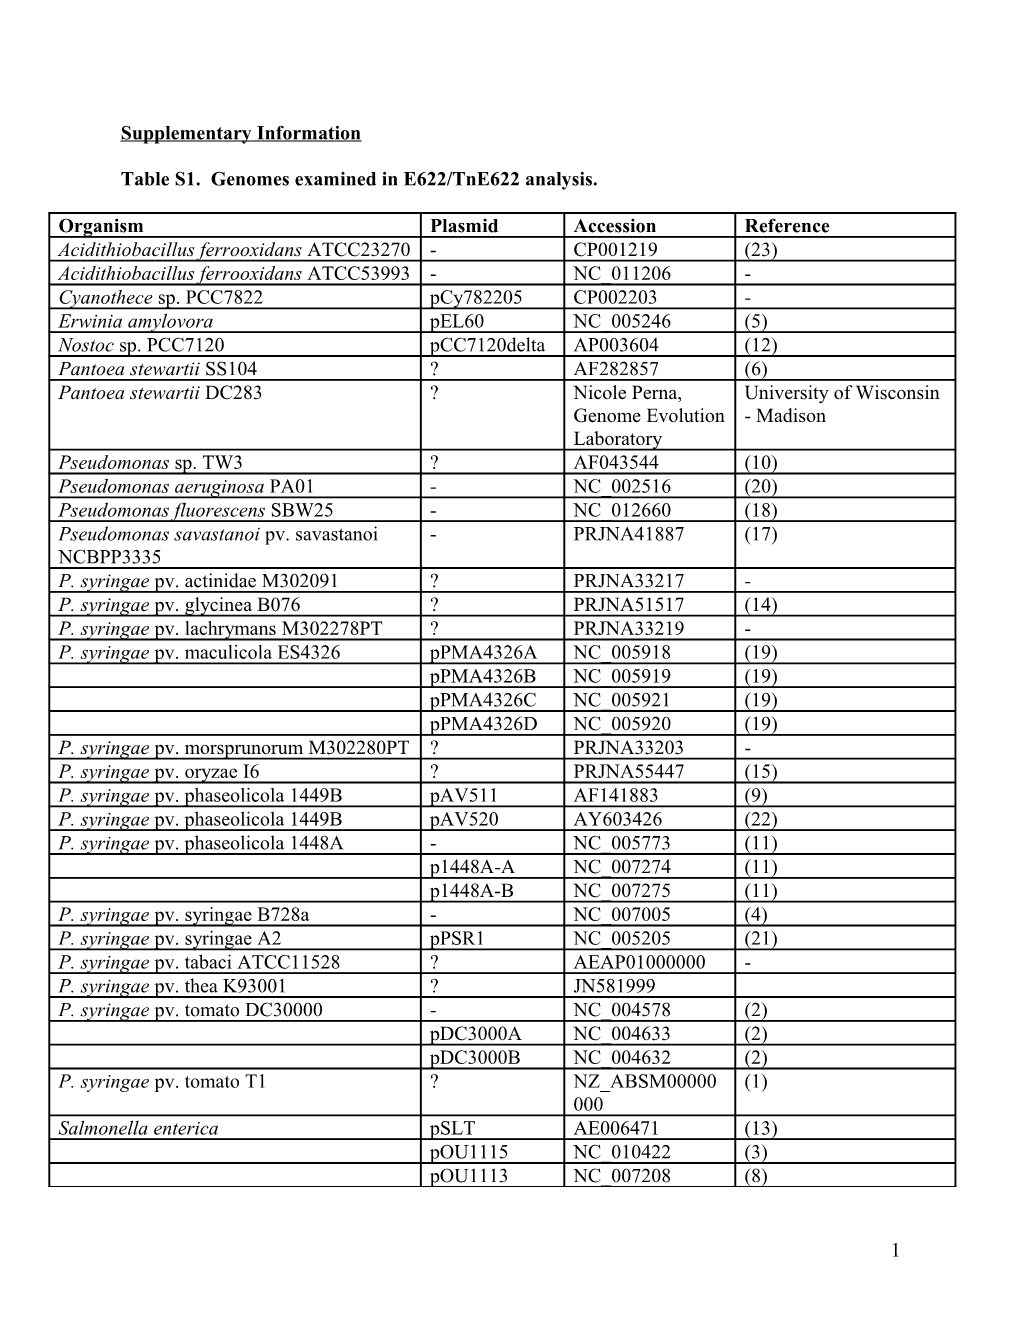 Table S1. Genomes Examined in E622/Tne622 Analysis